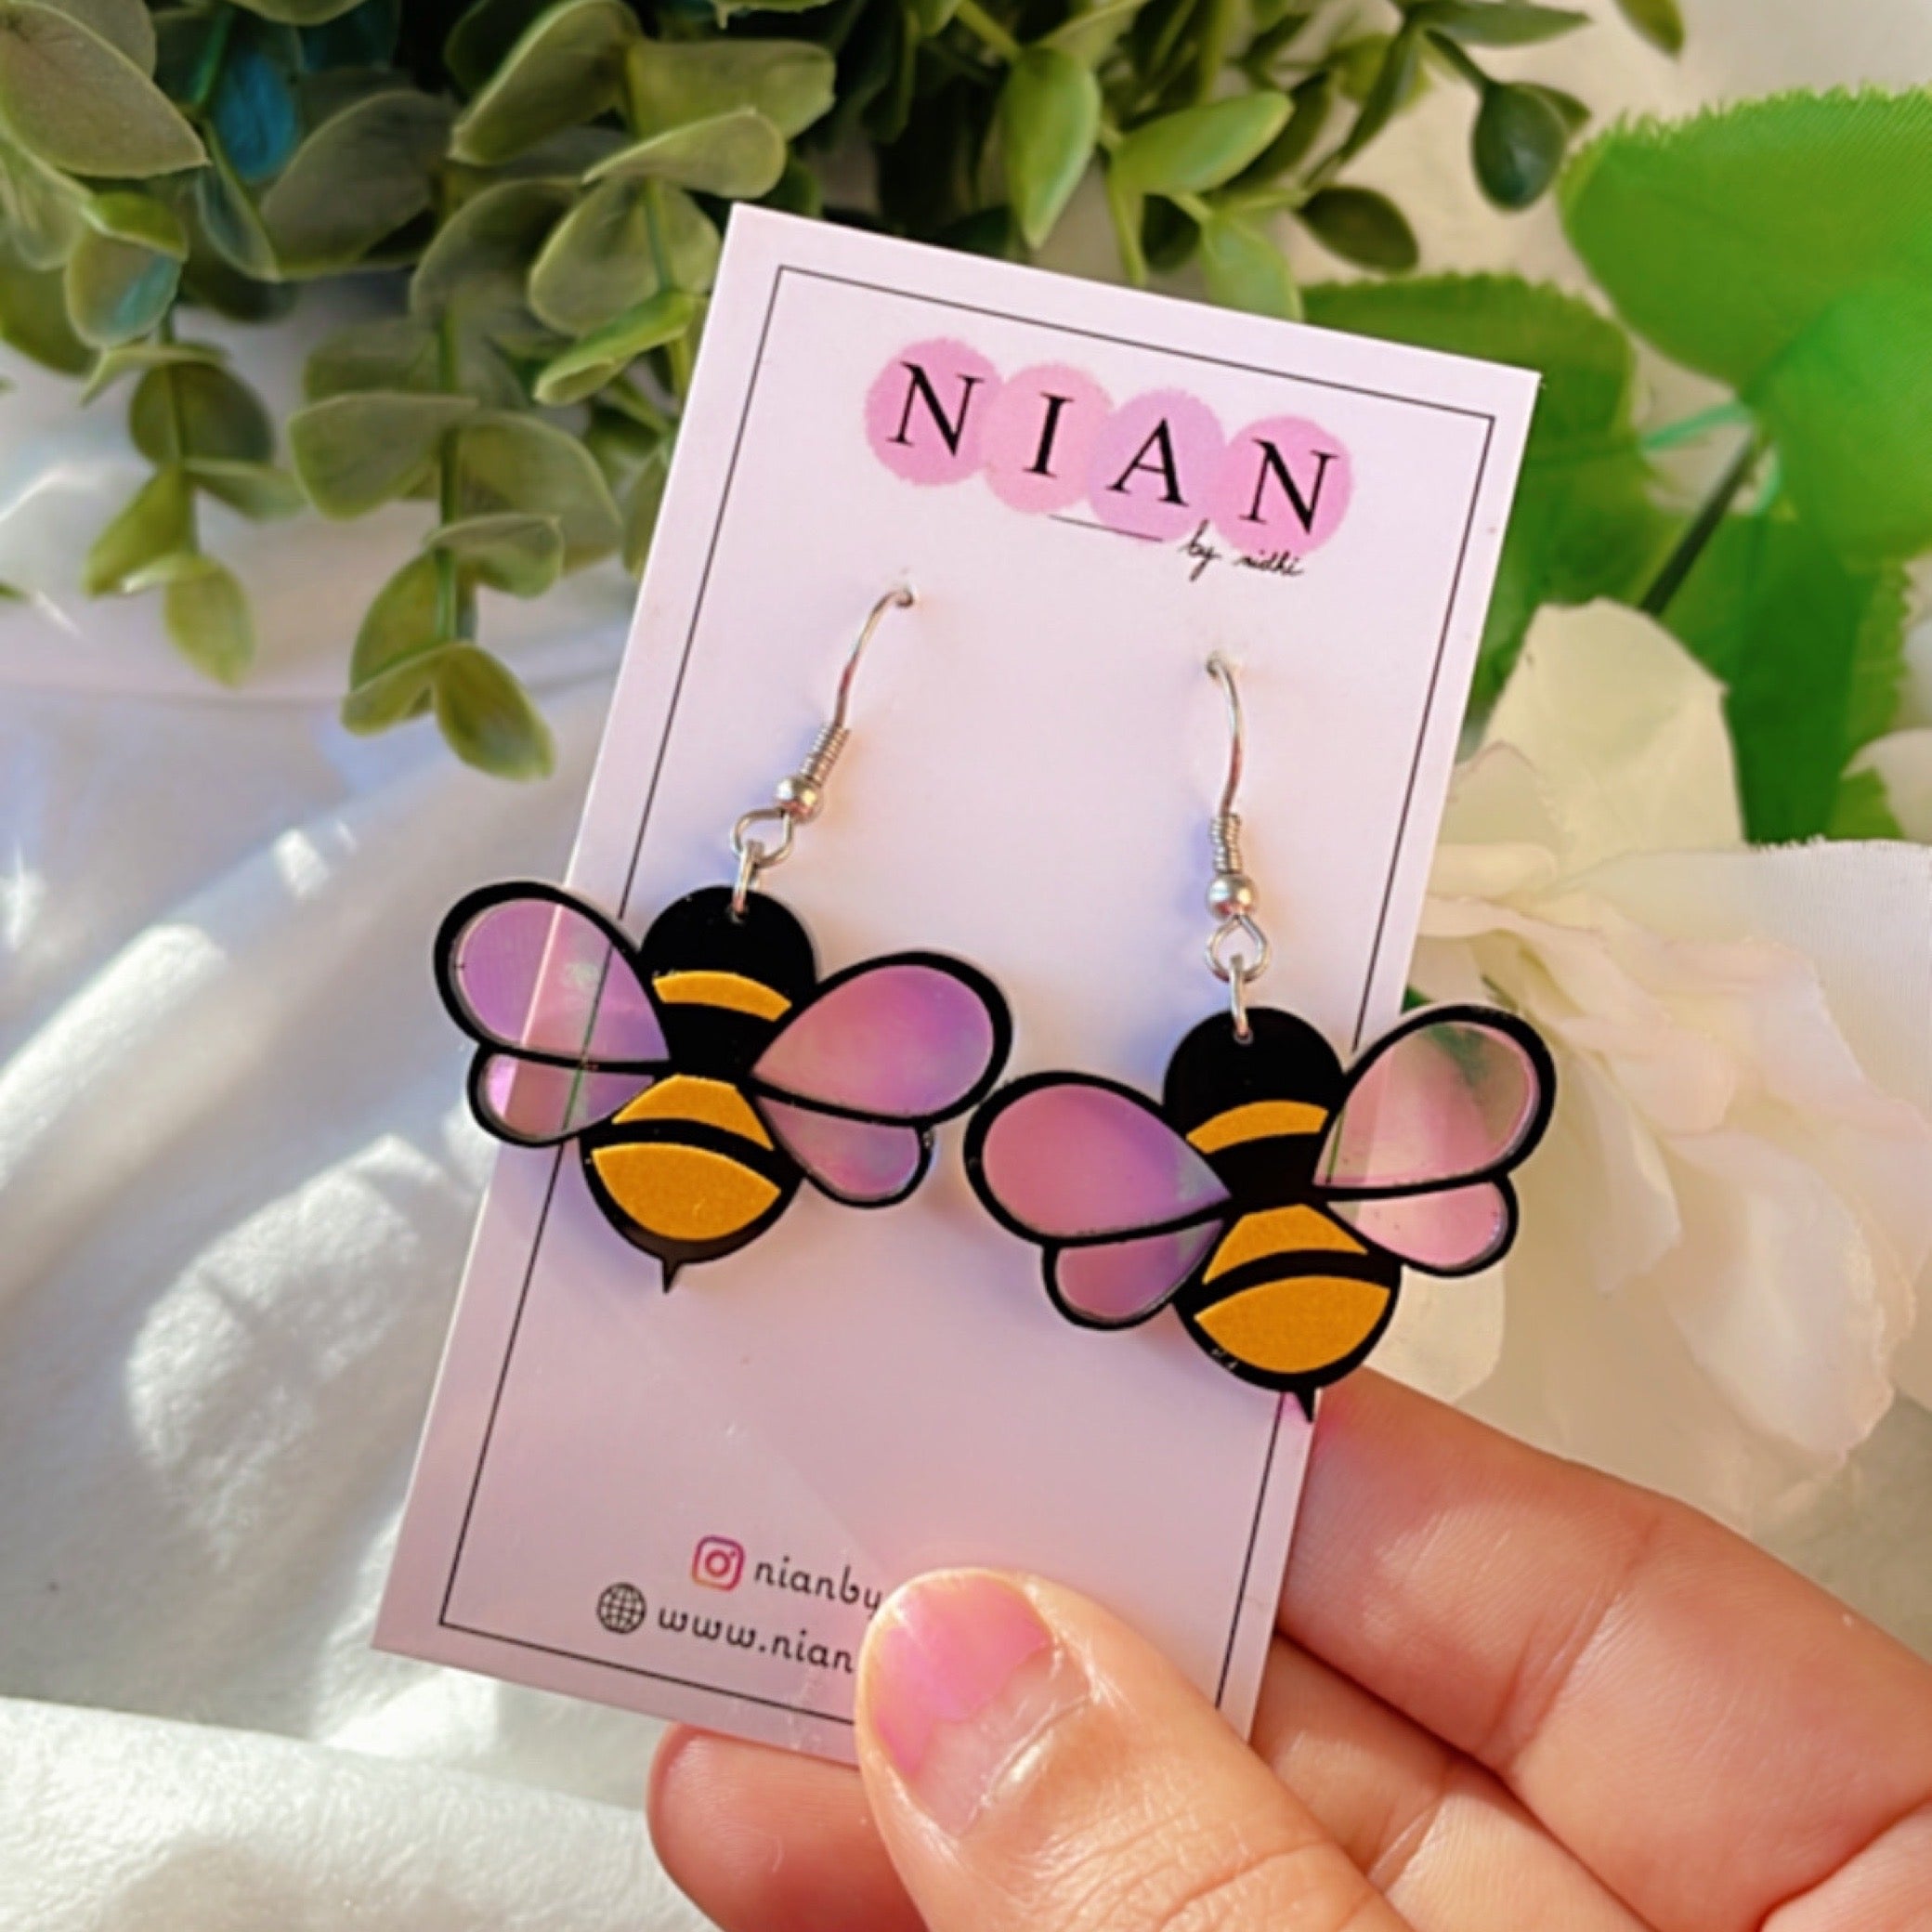 Baby Bee Earrings - Yellow and Black with a Holographin Effect - Nian by Nidhi - placed in a white and green background, with a Nian by Nidhi earring card